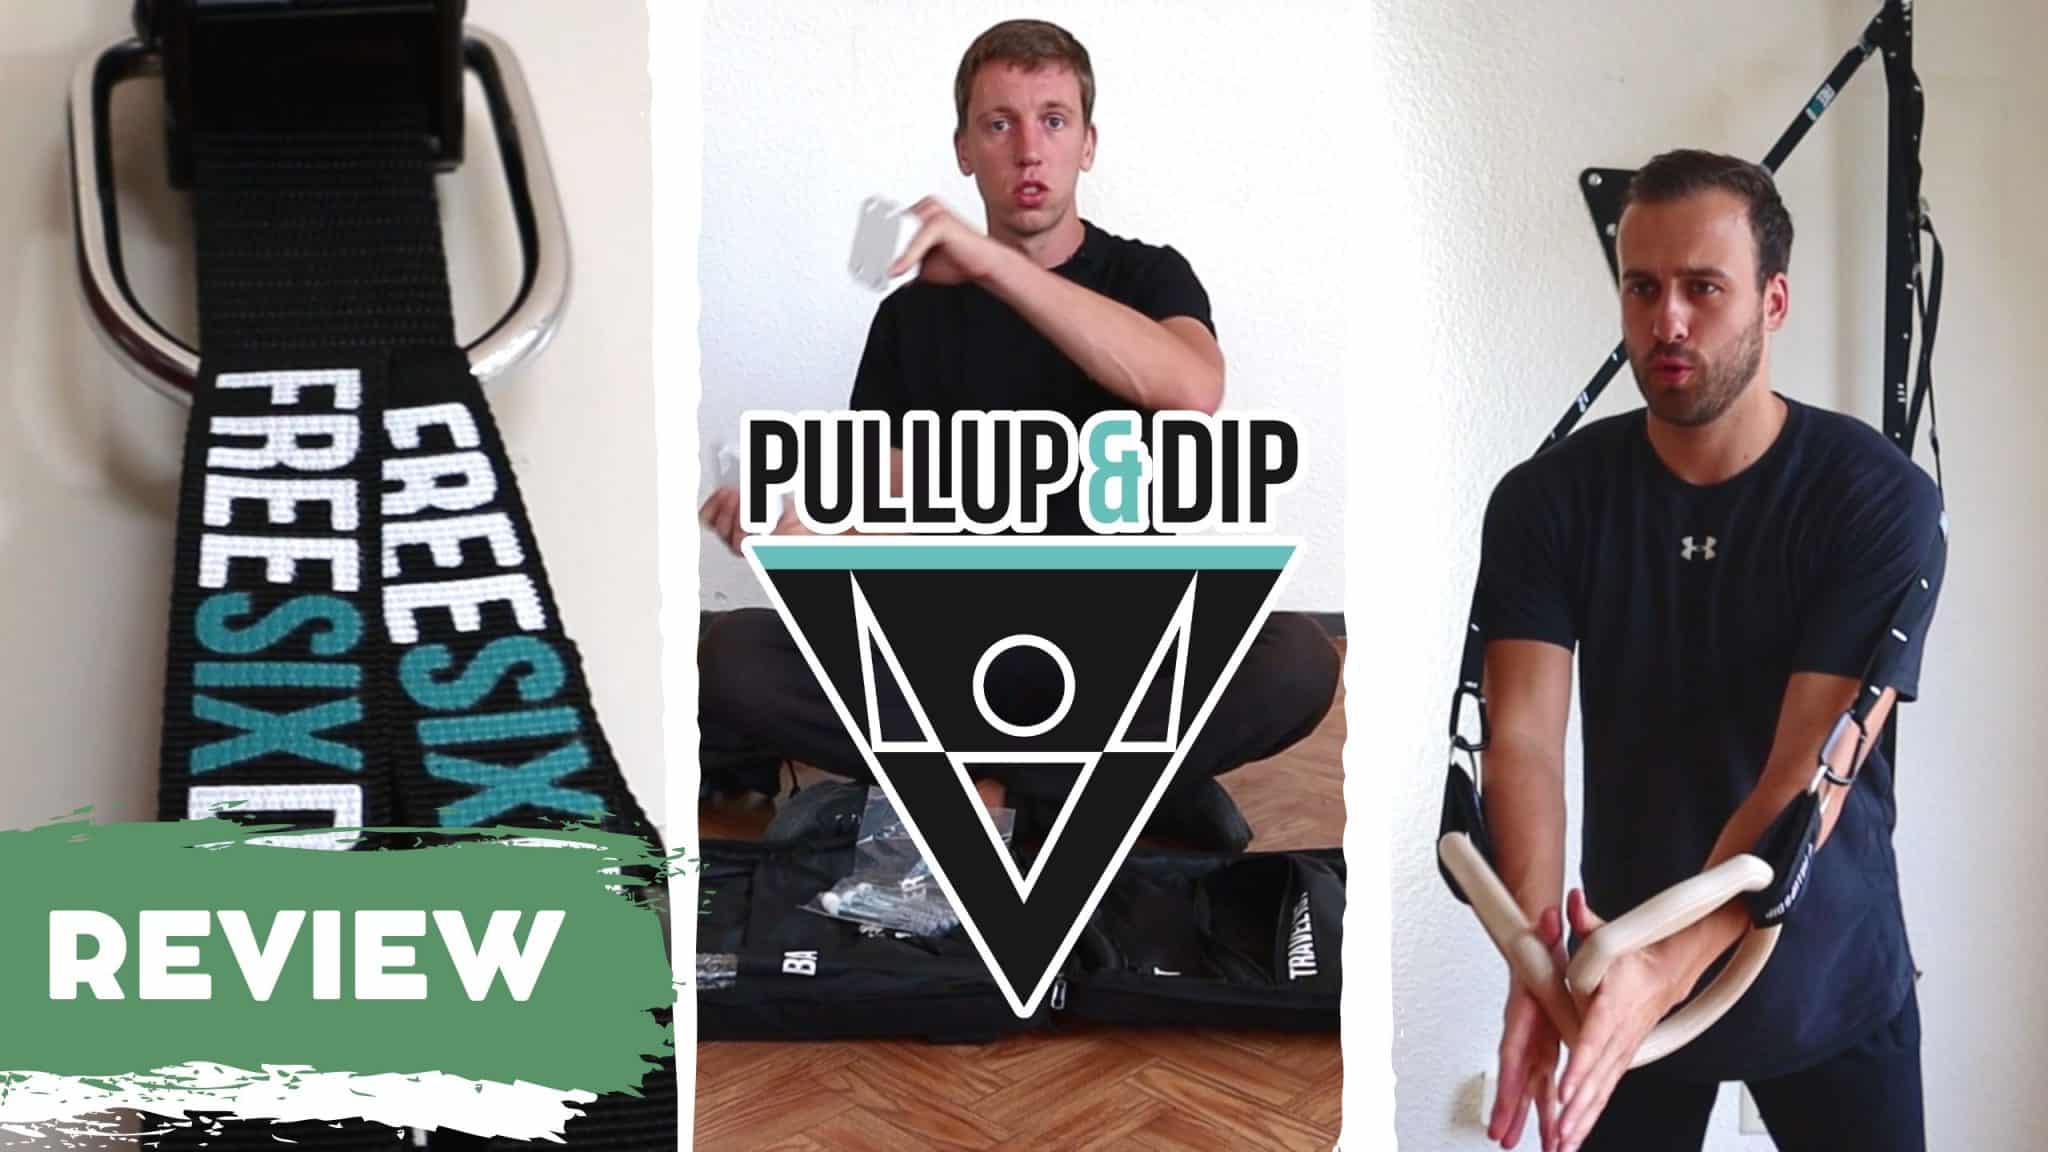 Pullup & Dip FREESIXD review by Calisthenics Worldwide